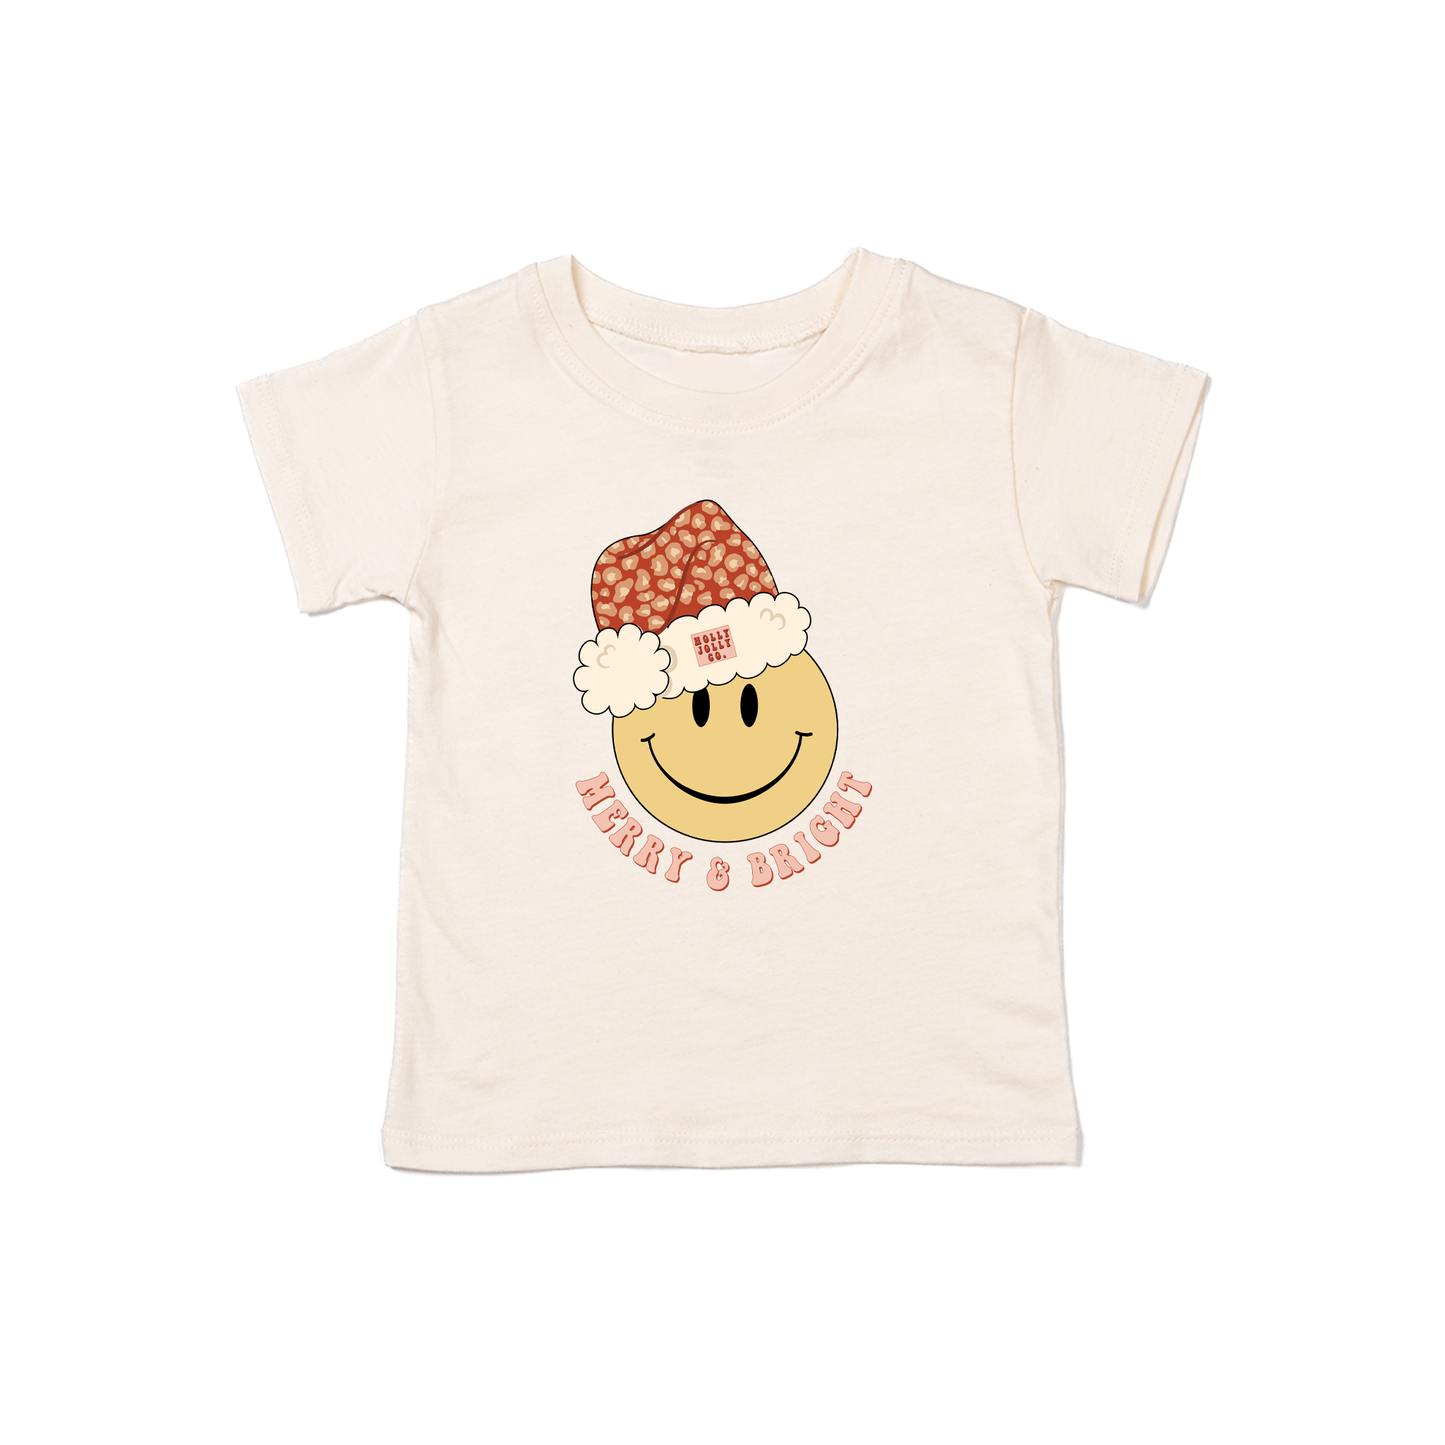 Merry & Bright Smiley Face - Kids Tee (Natural)